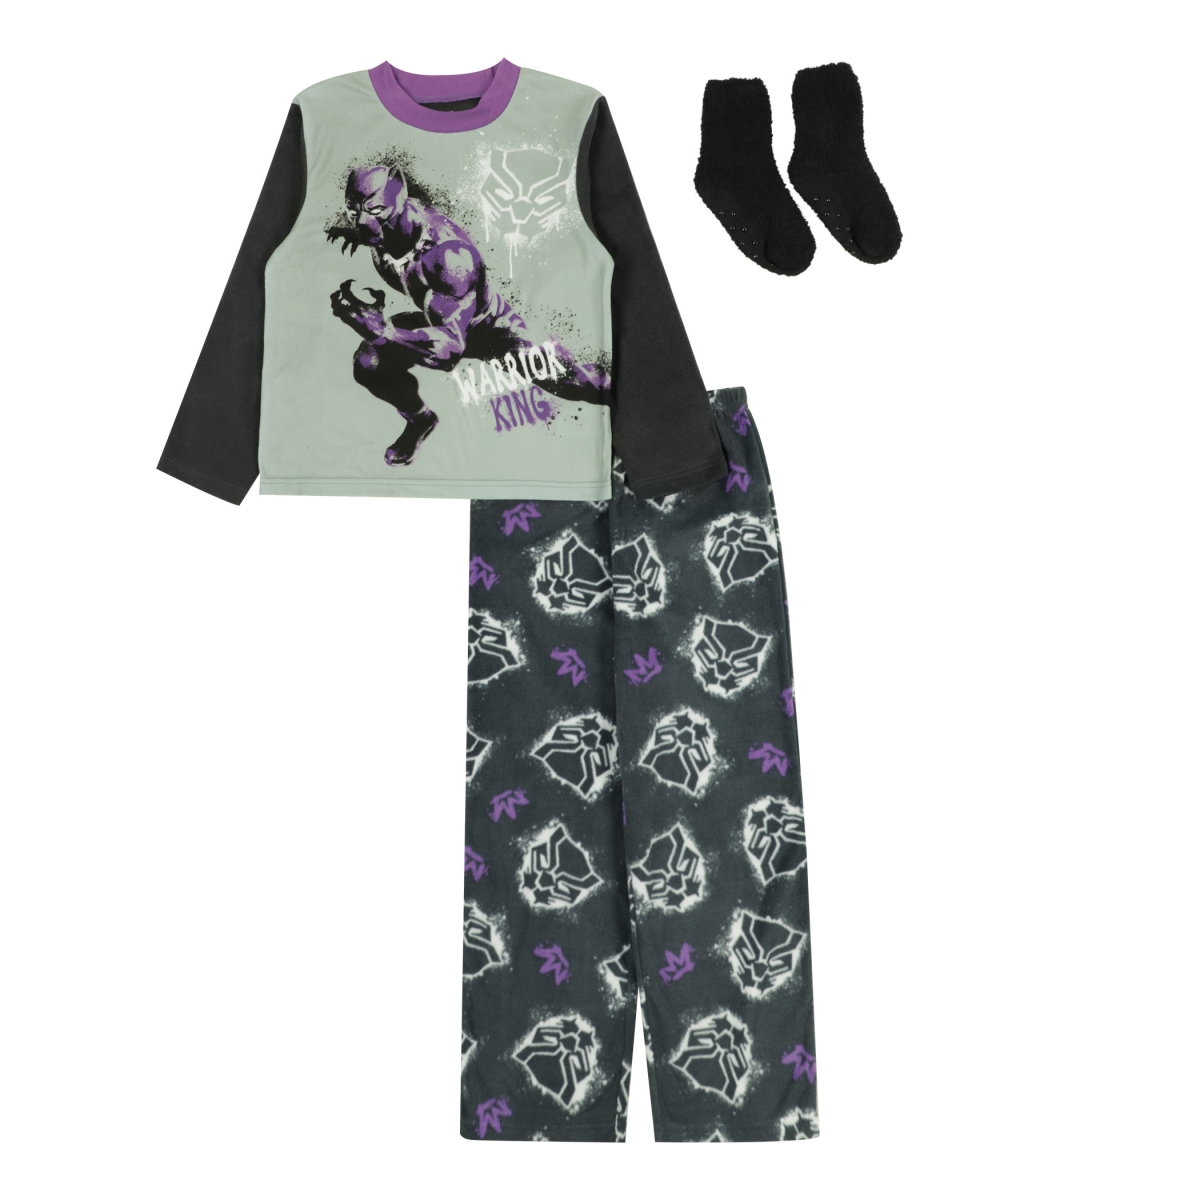 Picture of Black Panther 856007-size6 Black Panther Warrior King Youth Pajama Set - Size 6 - 3 Piece